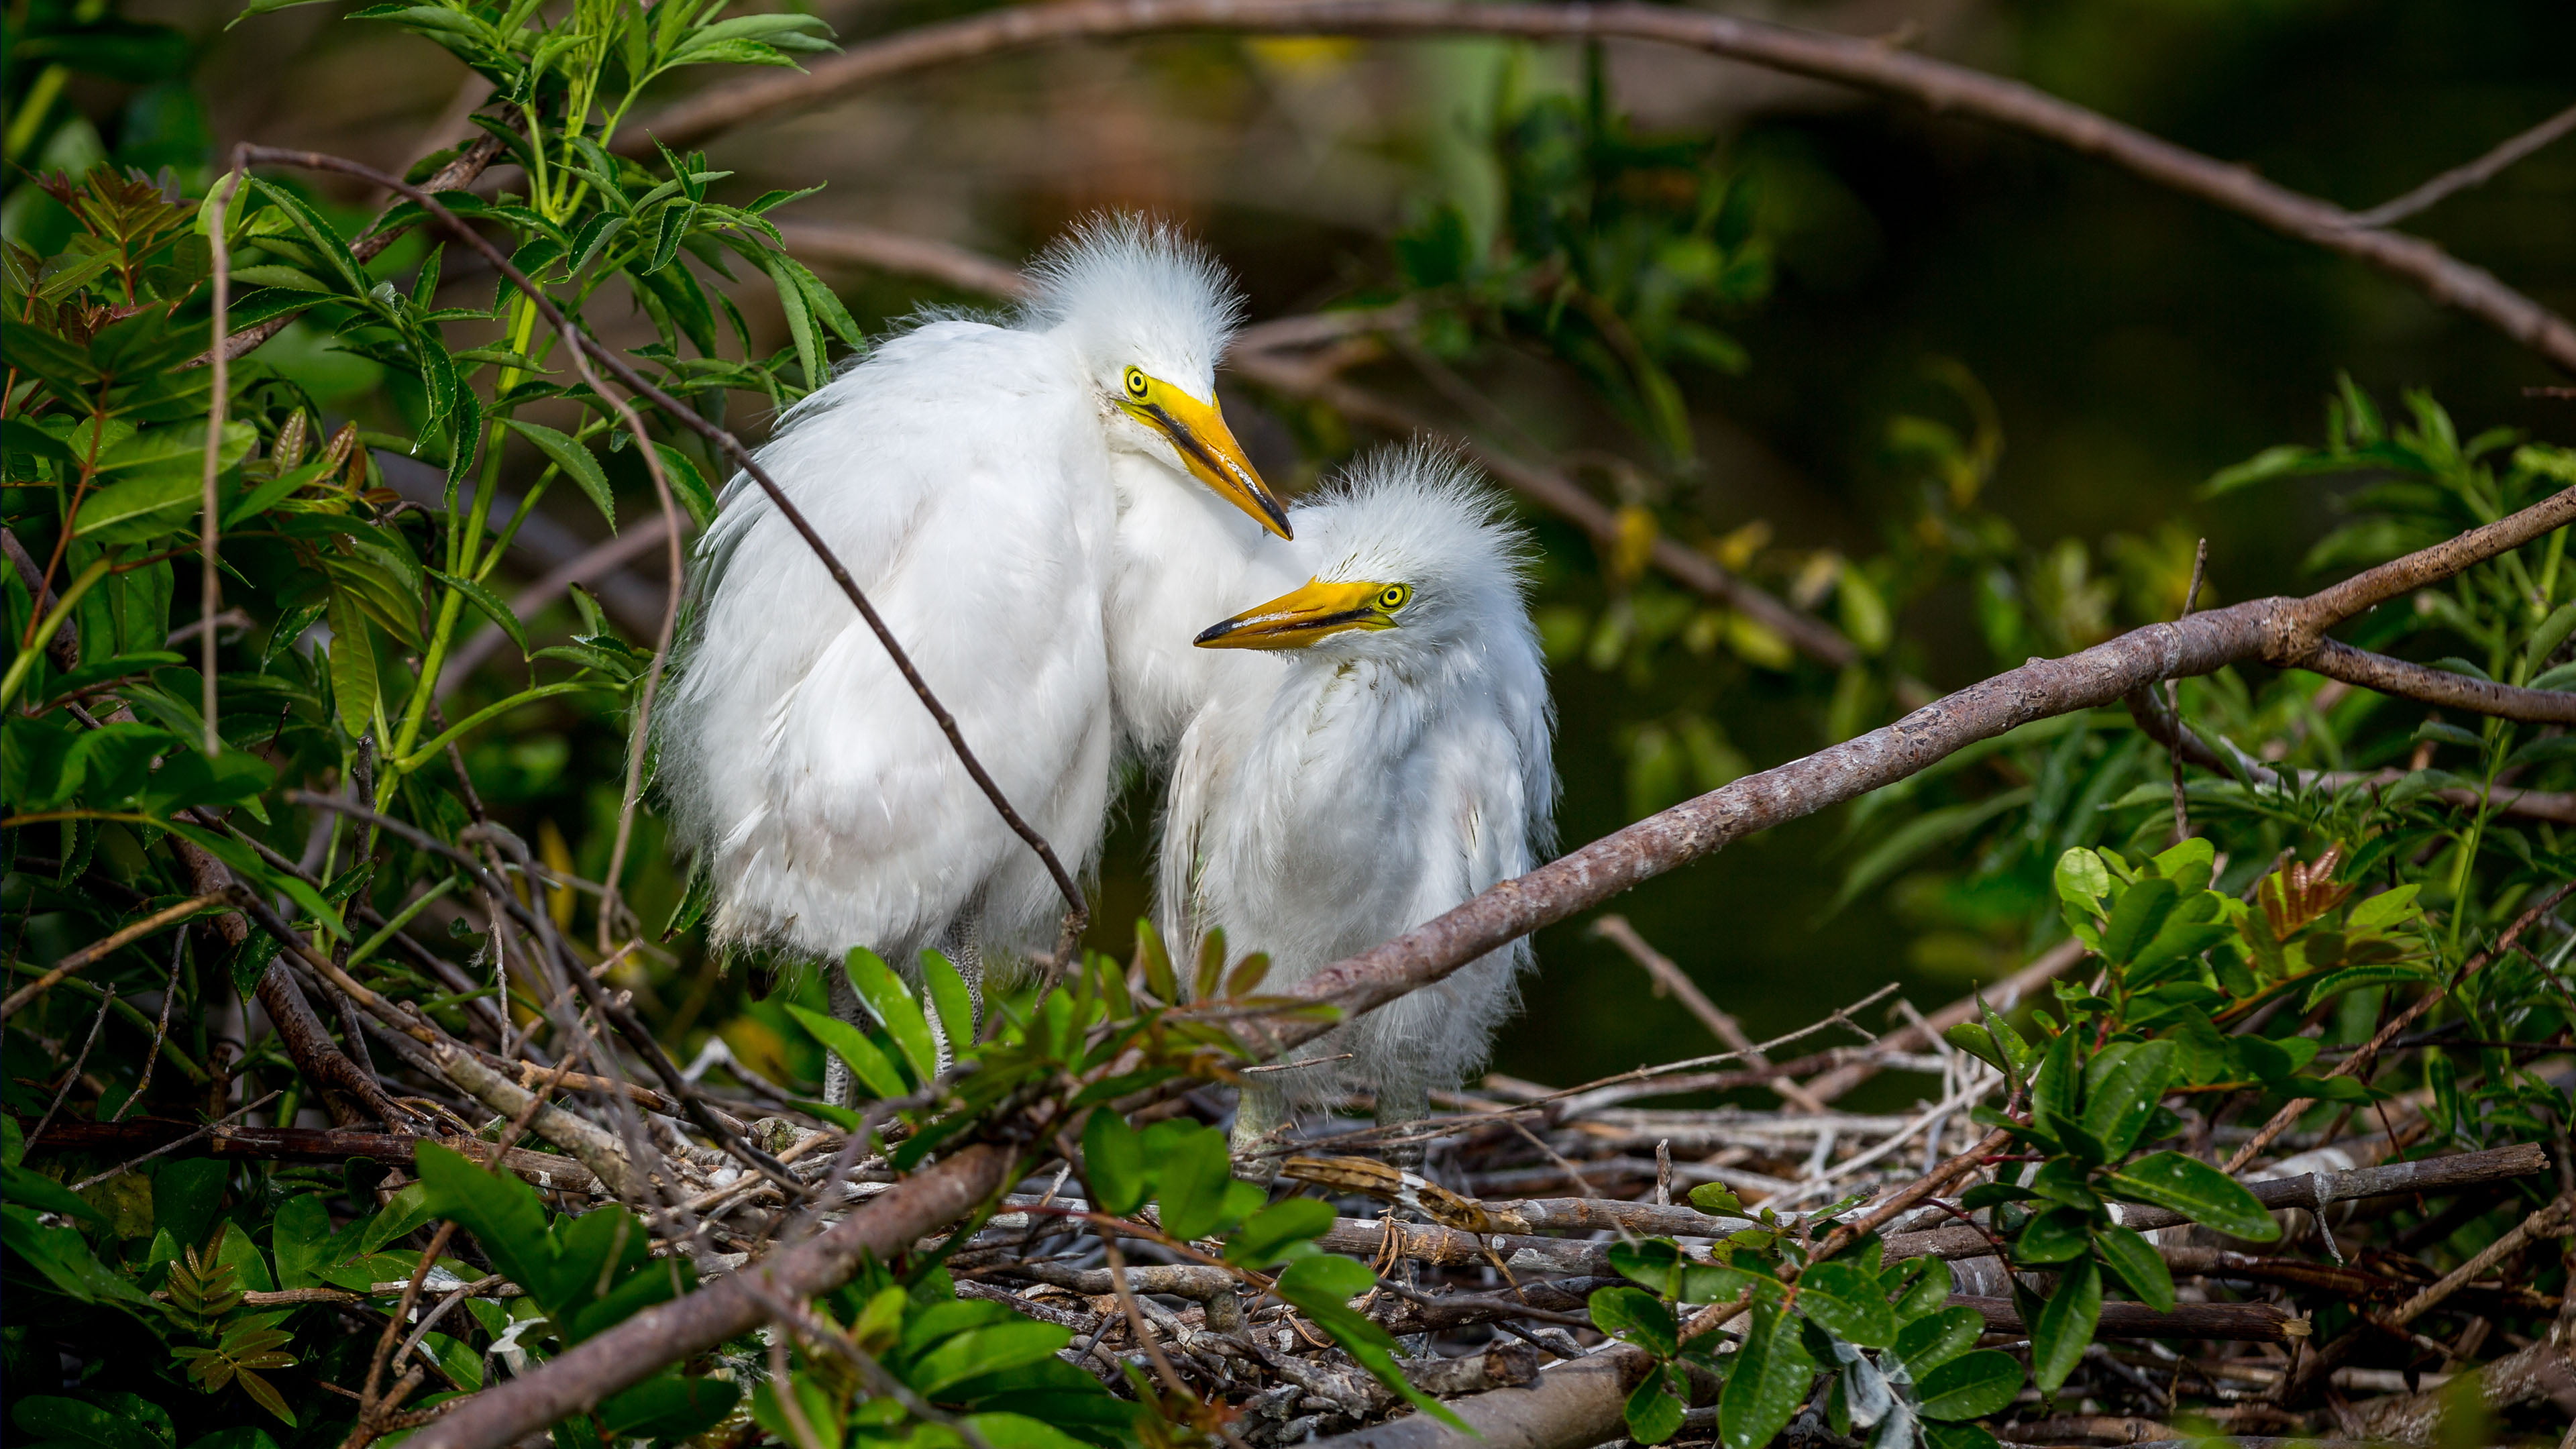 Cattle Egret Bird Family Ardeidae Species Of The Heron Are In Tropics Subtropical And Temperate Zones Desktop Wallpaper Hd 3840×2160